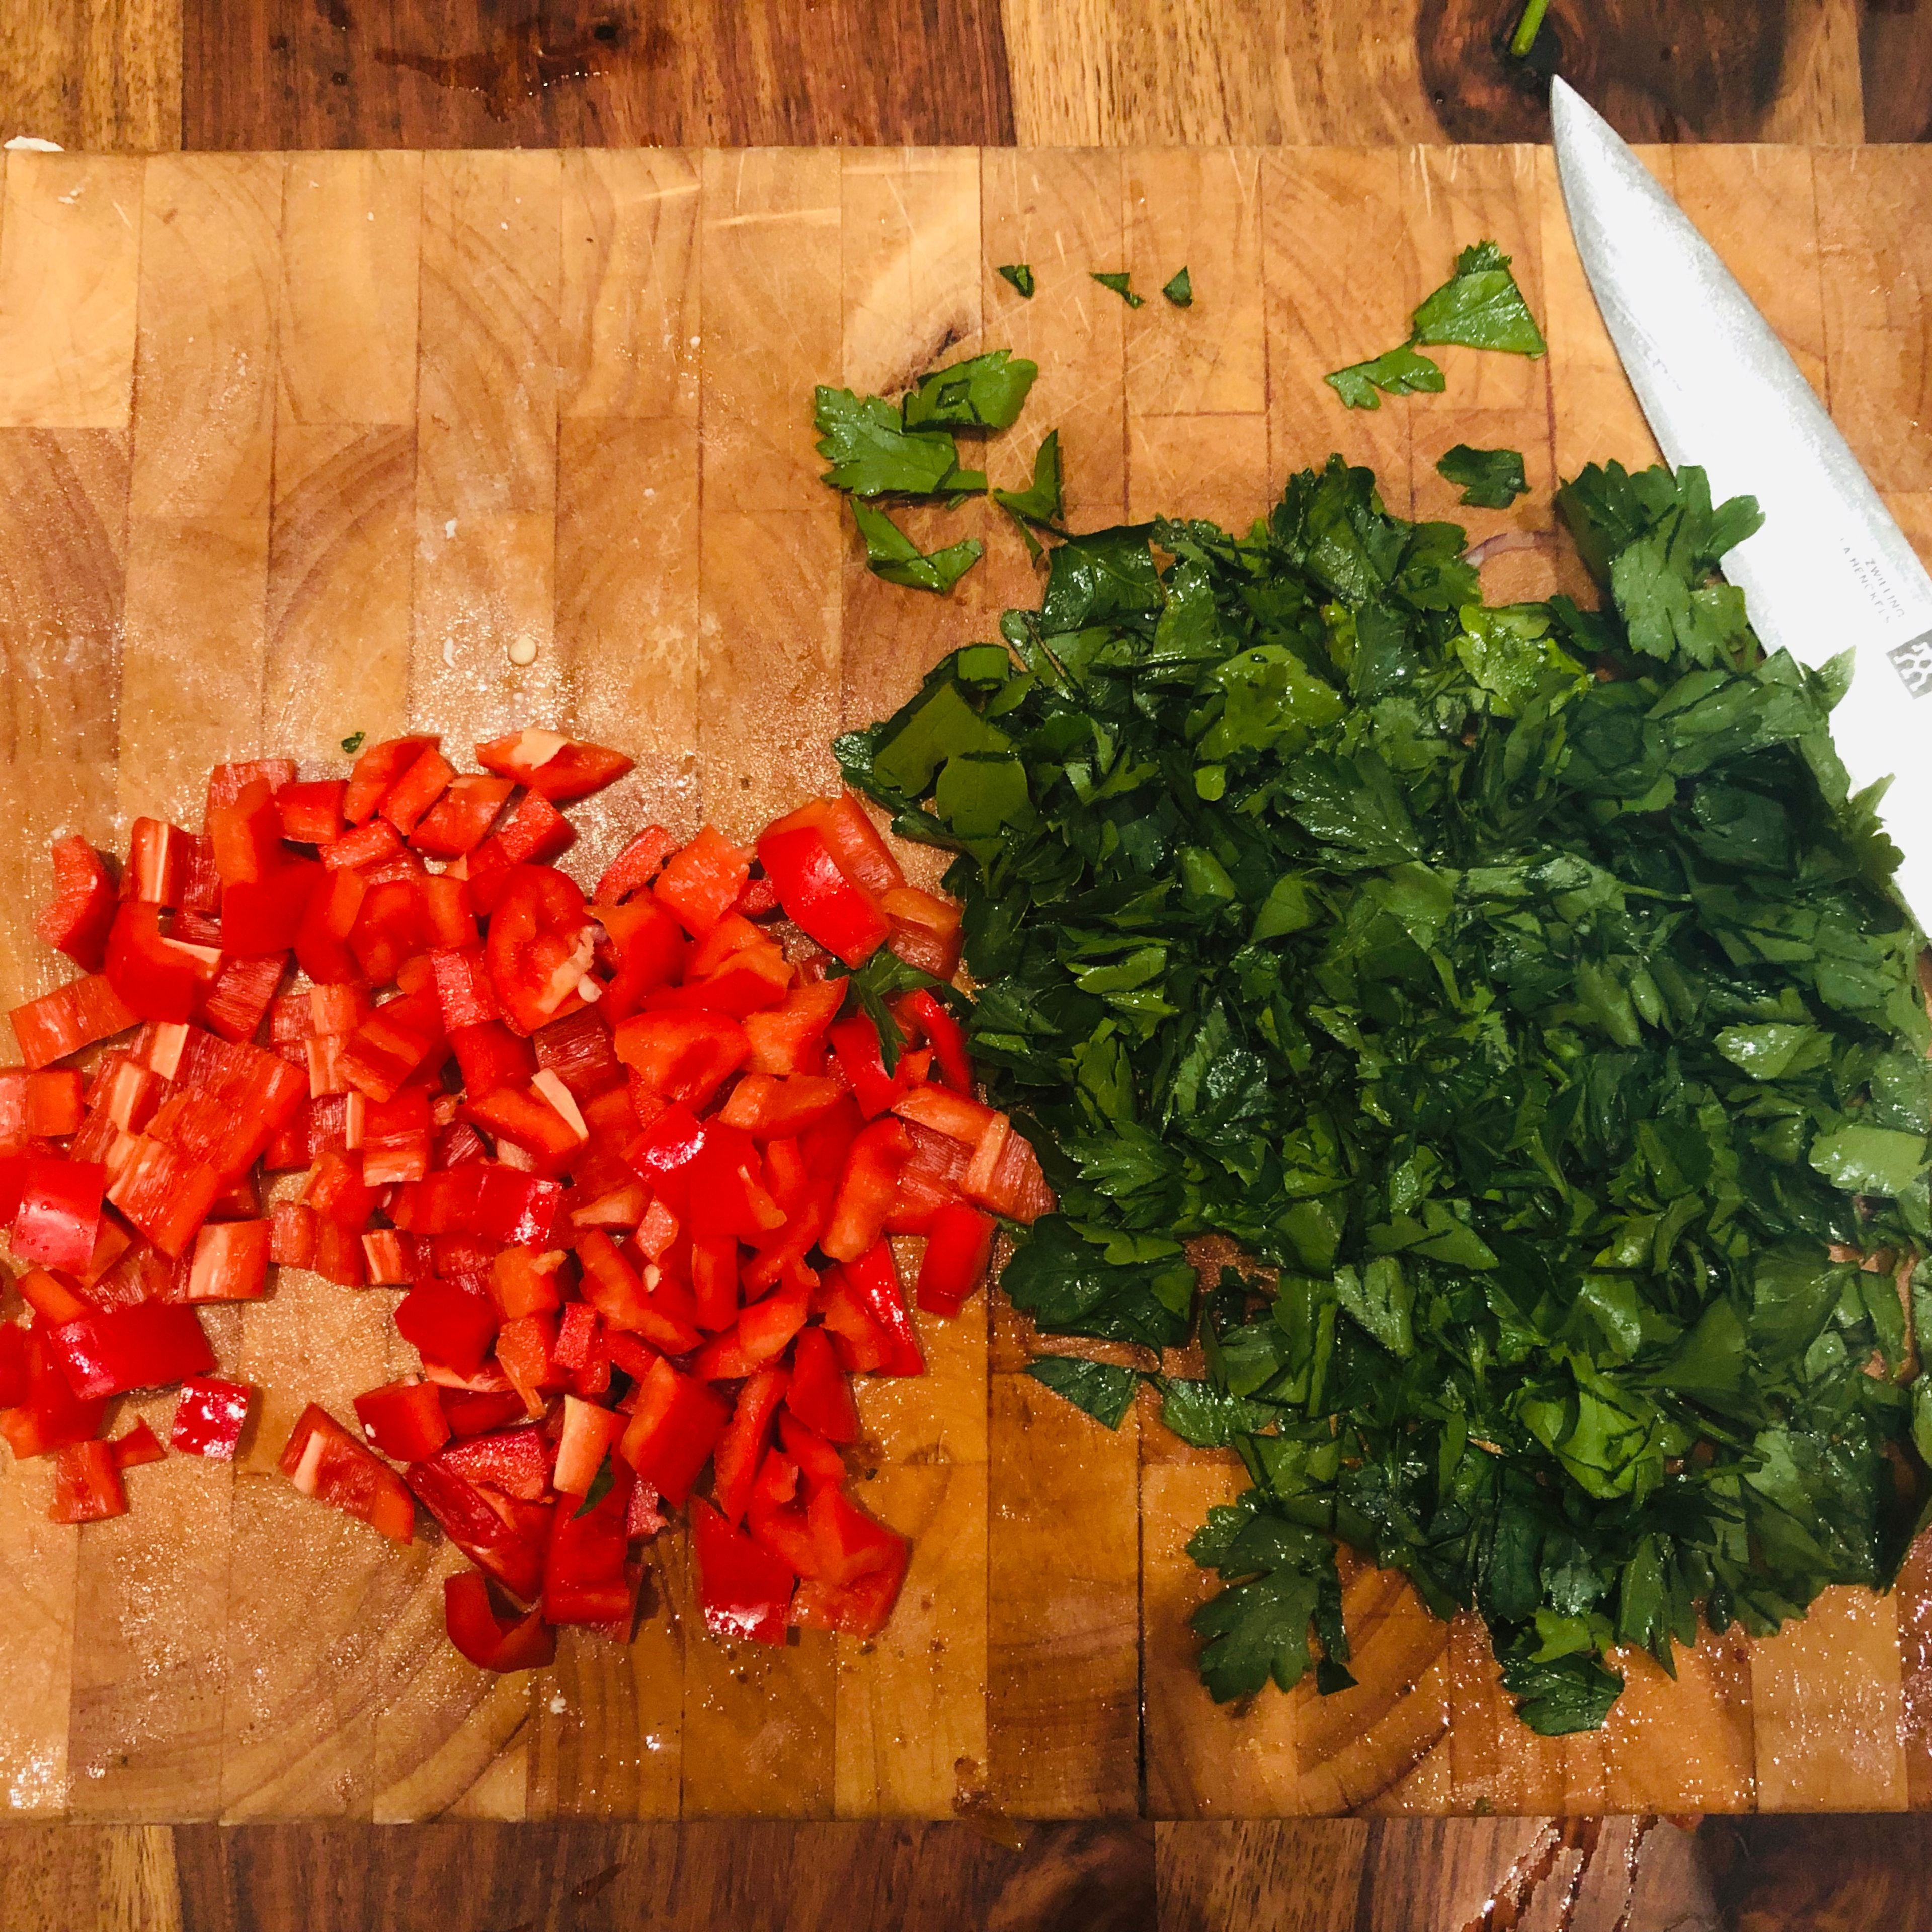 Mince bell pepper. Remove the stems from the parsley and chop roughly.